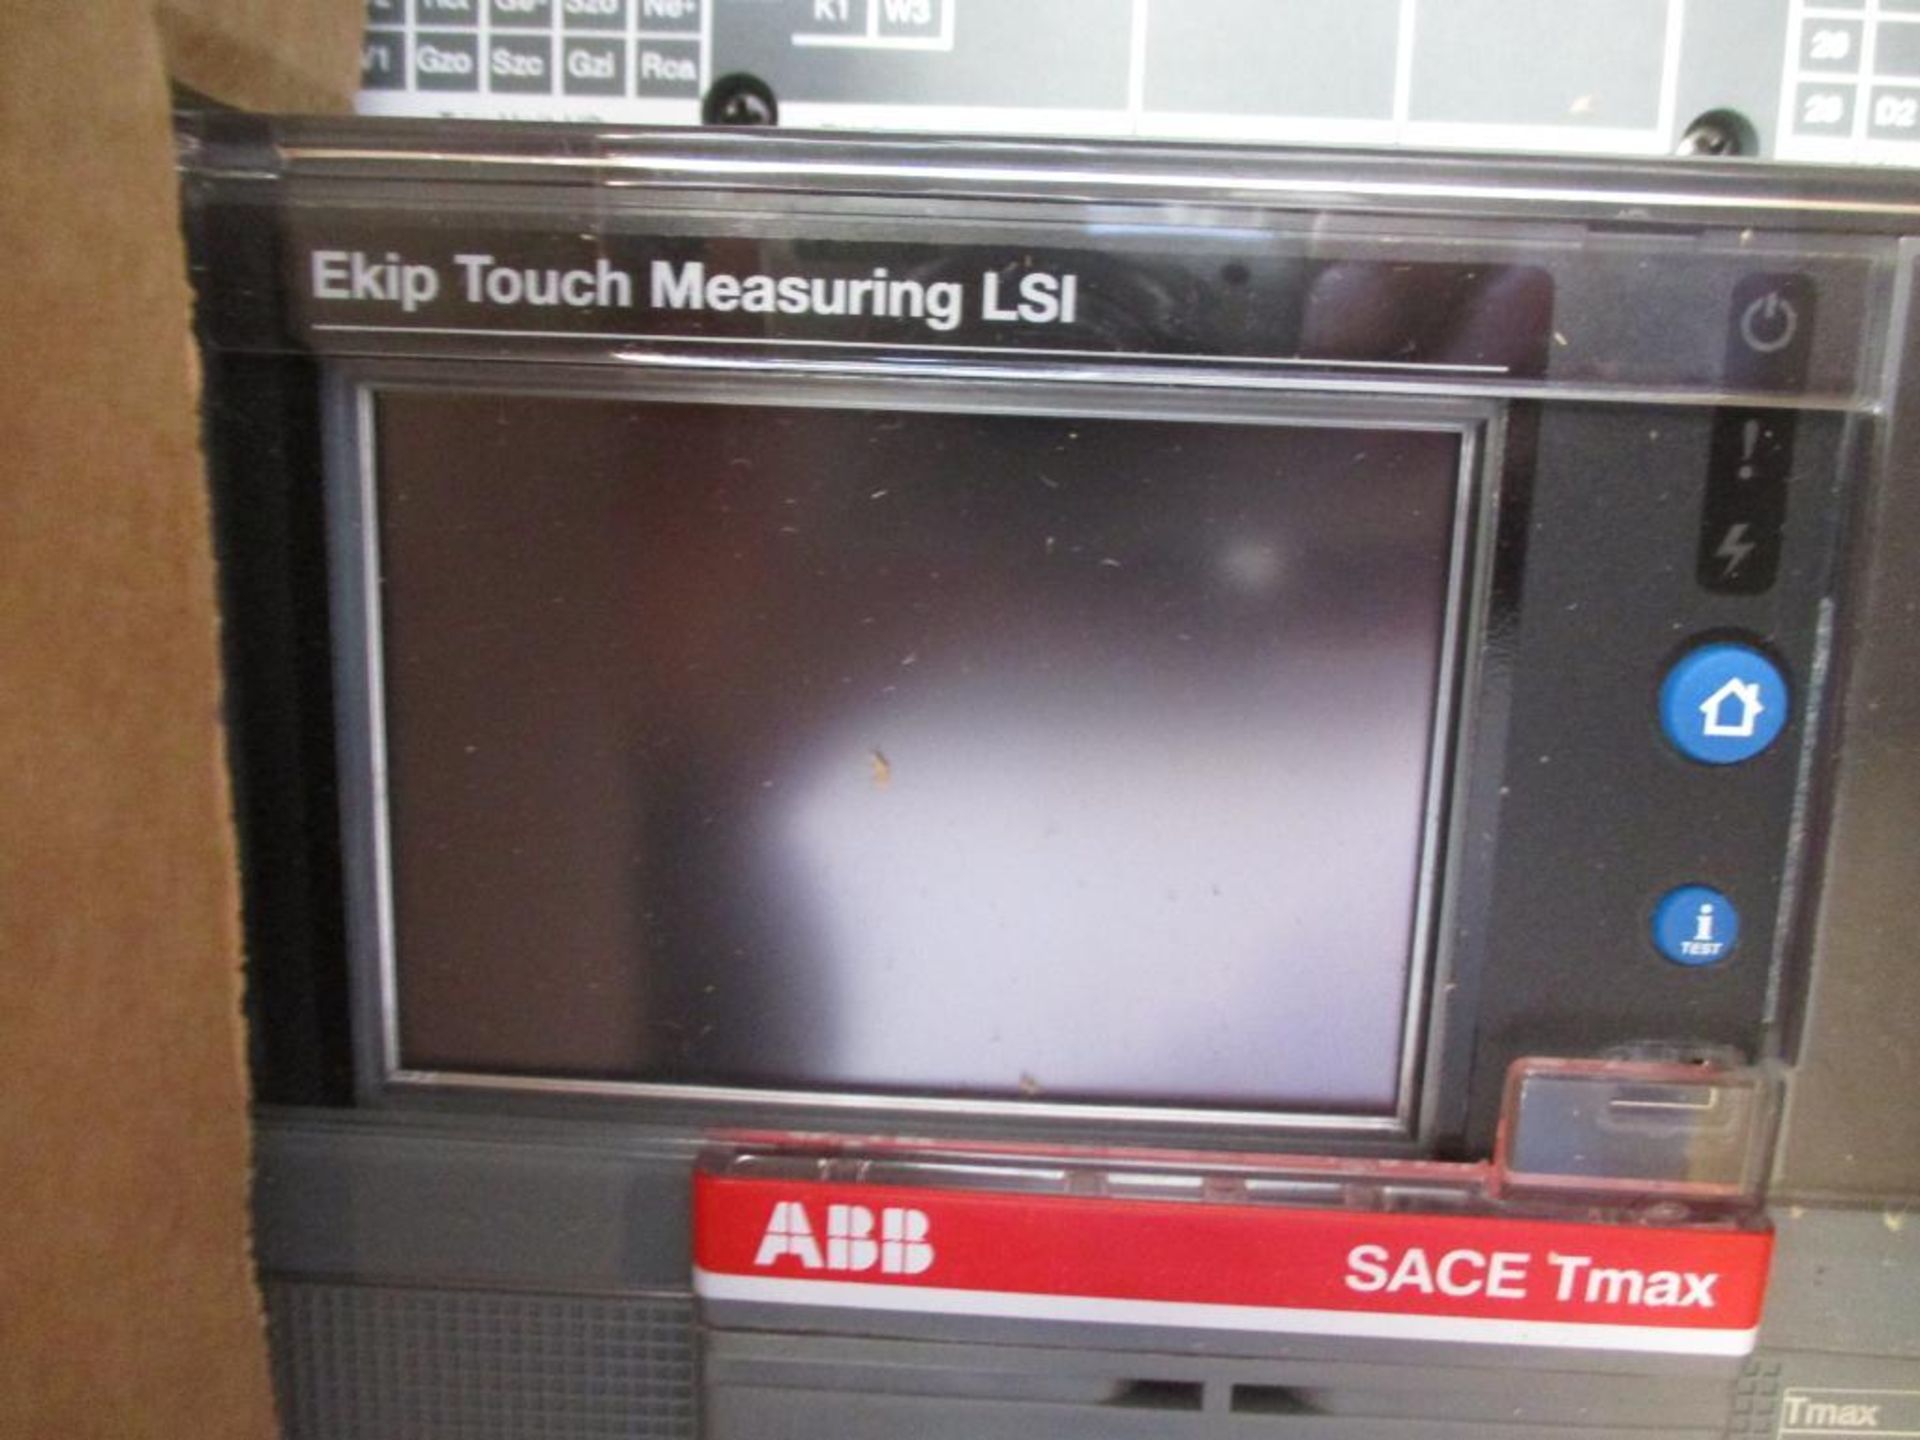 ABB 800 AMP Circuit Breaker, SACE TMAX XT7 H 800, EKIP Touch Measuring LSI 3 Pole (New in Box) - Image 2 of 4